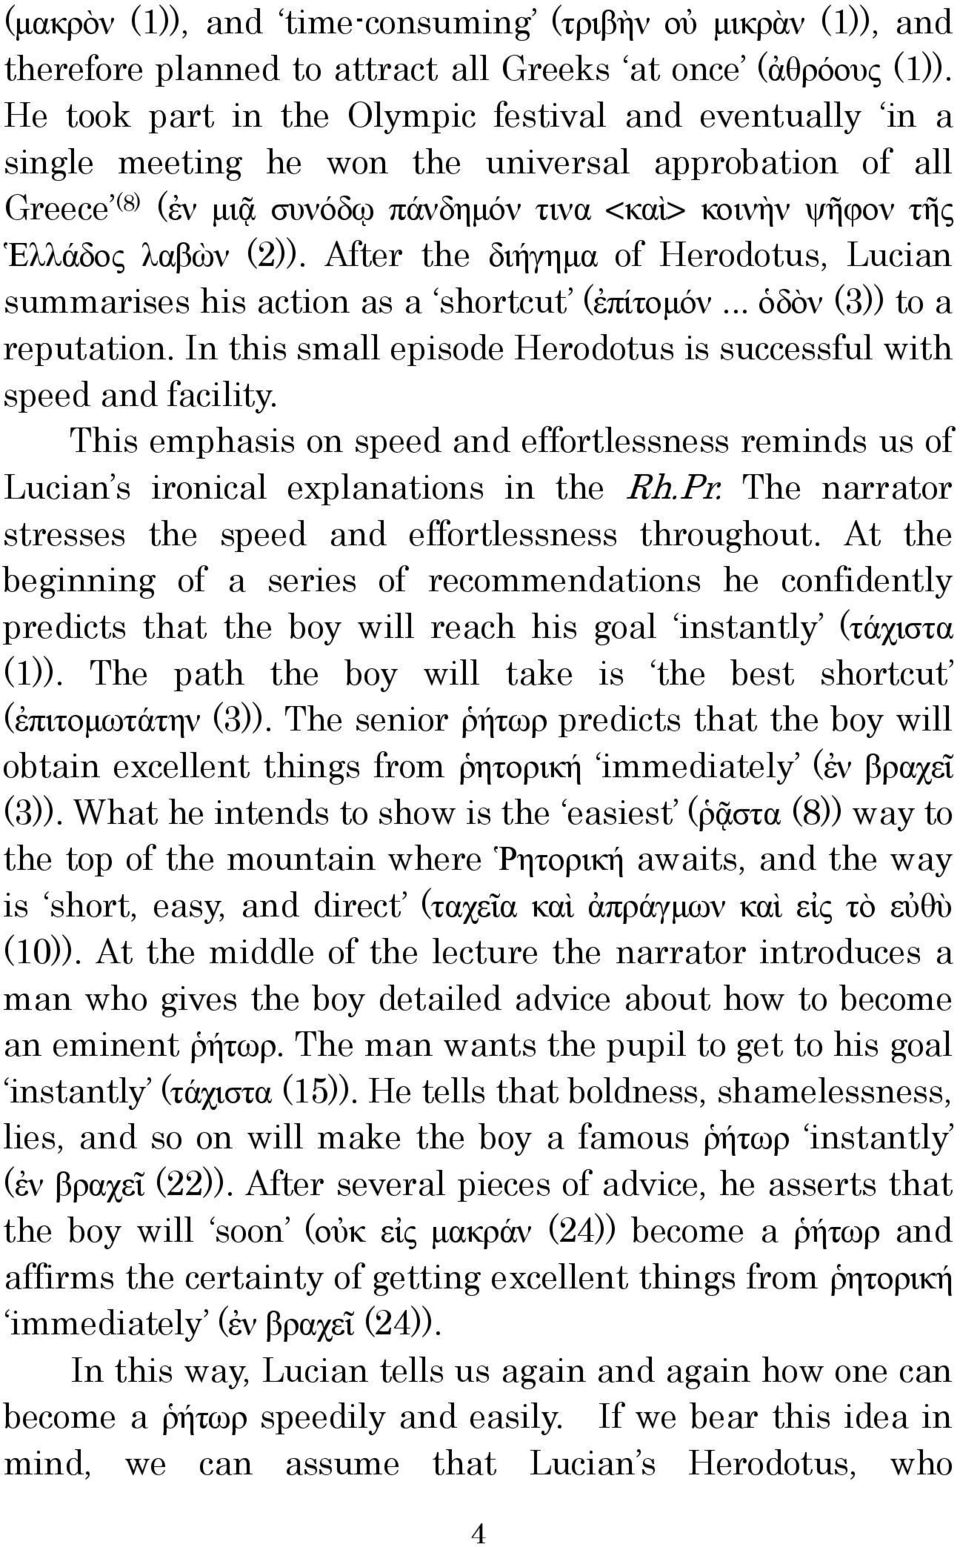 After the διήγημα of Herodotus, Lucian summarises his action as a shortcut (ἐπίτομόν... ὁδὸν (3)) to a reputation. In this small episode Herodotus is successful with speed and facility.